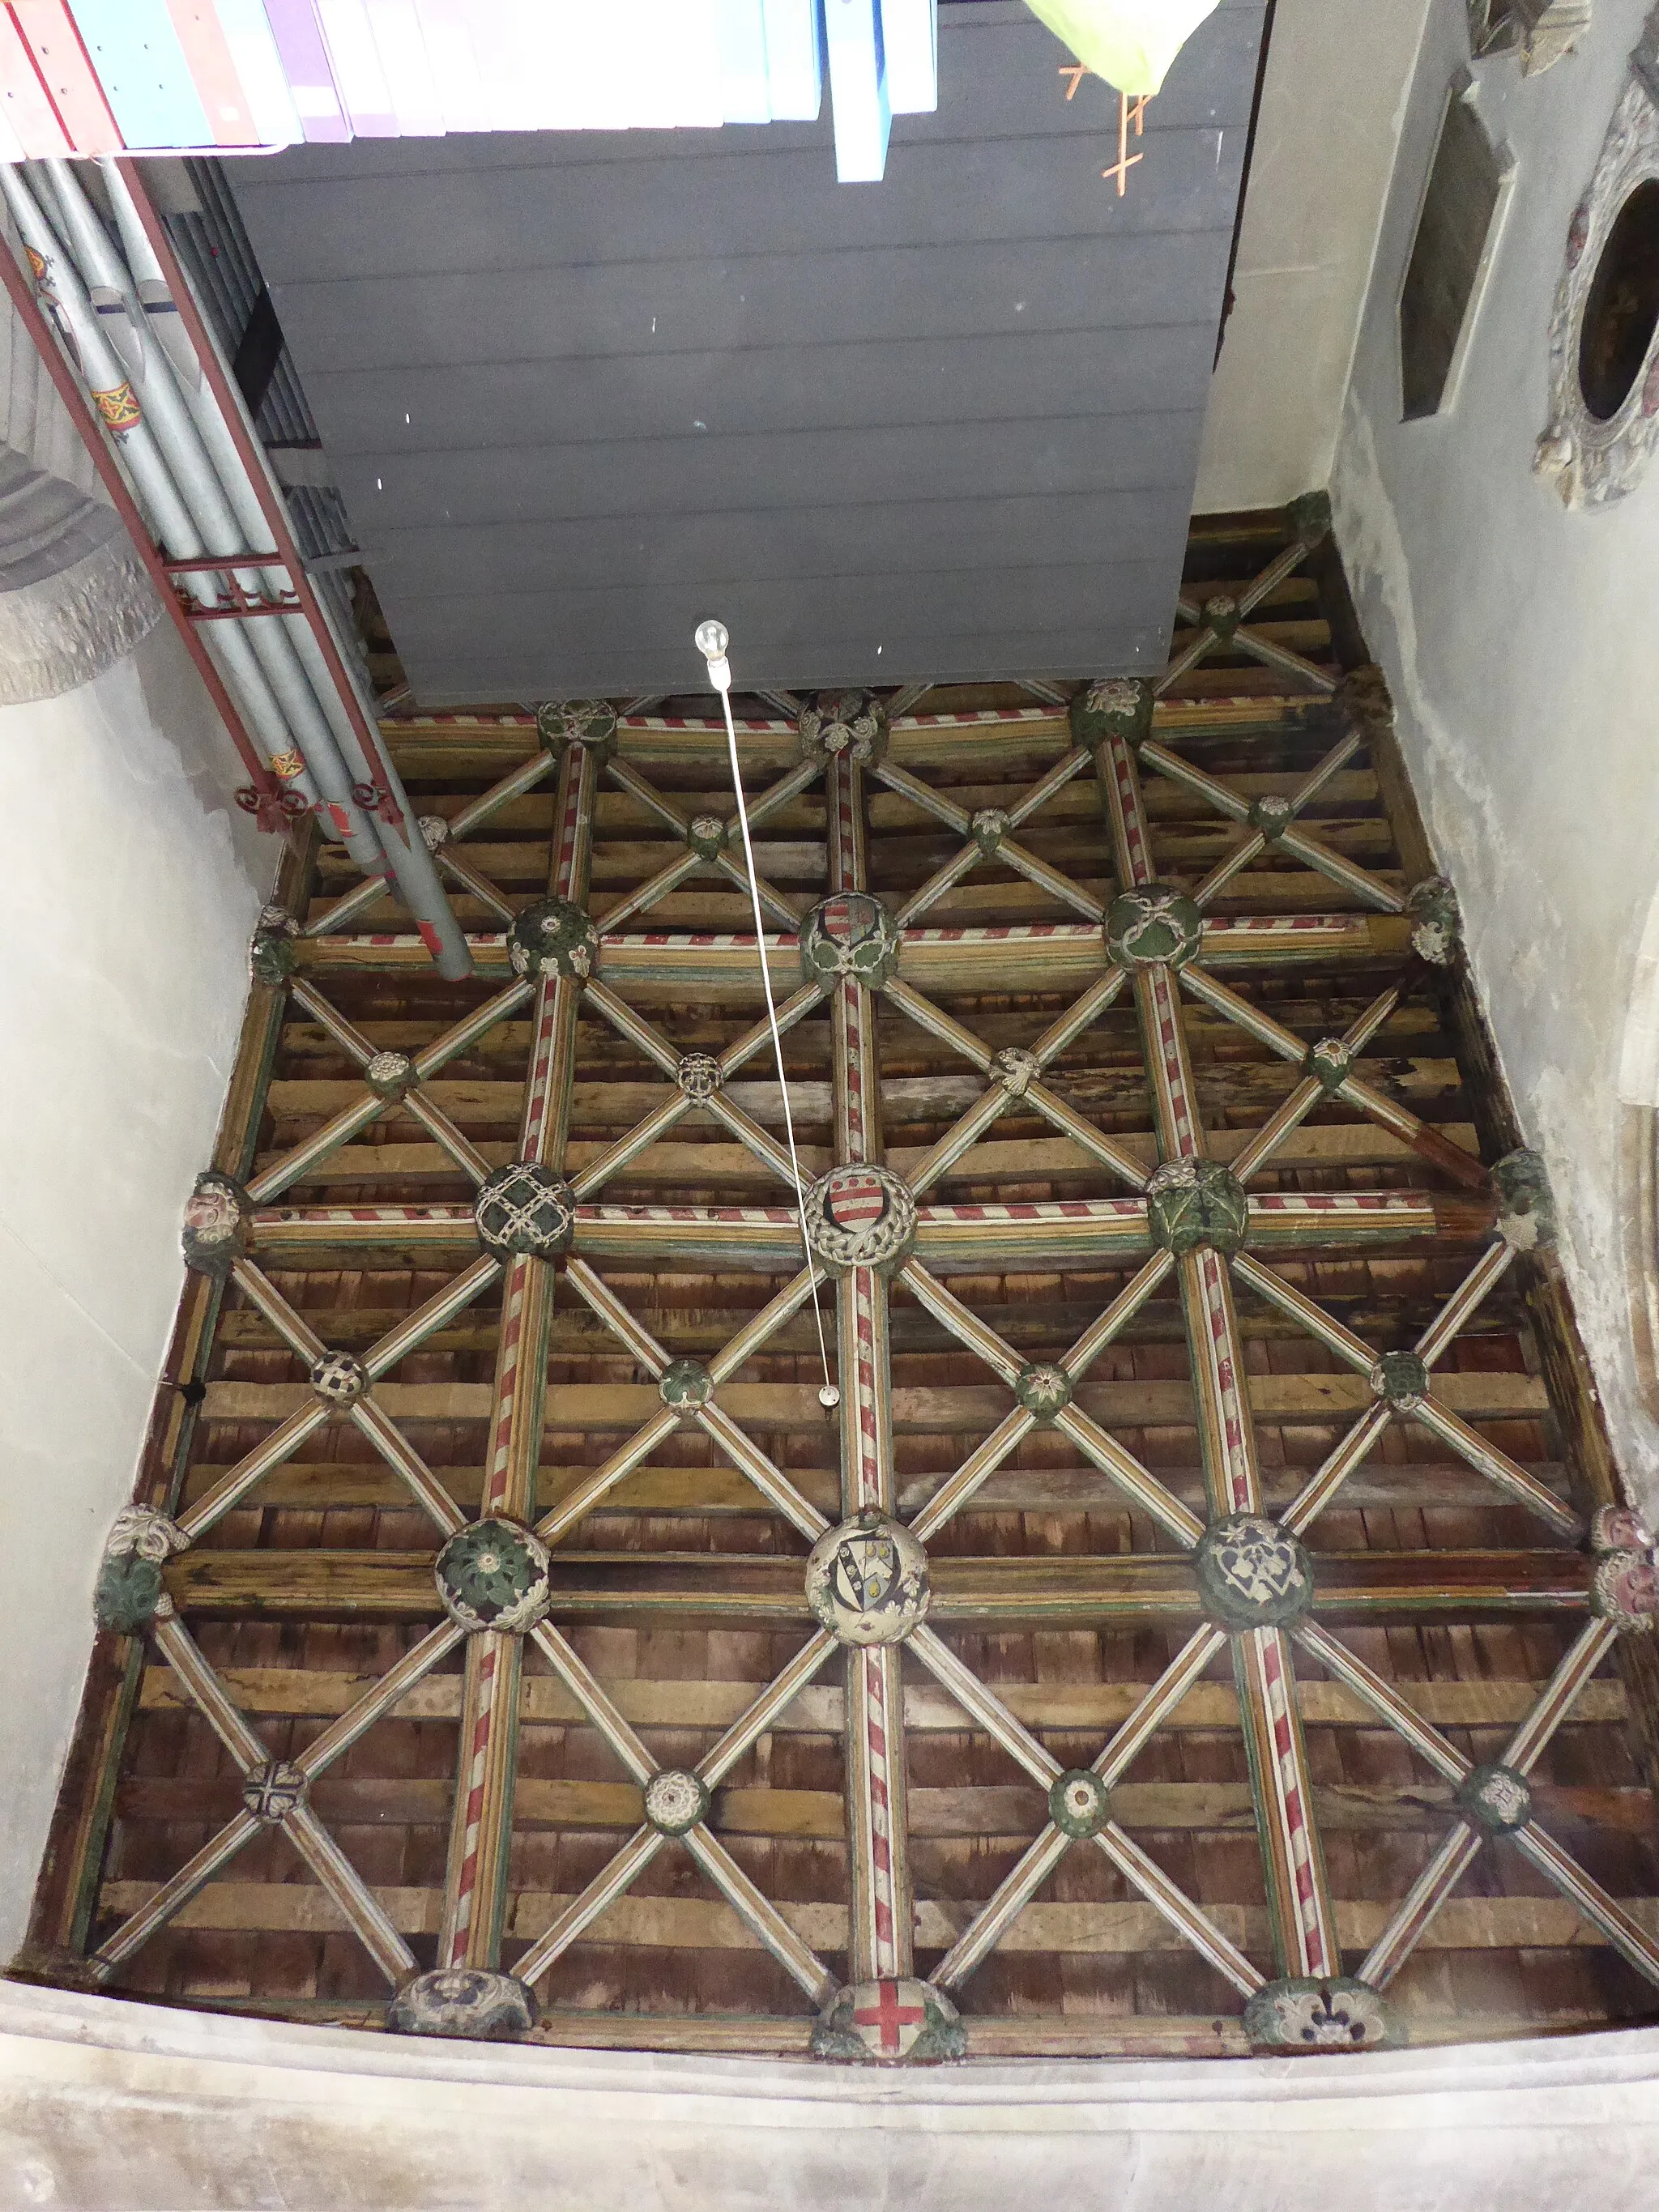 Photo showing: Ceiling of St Bridget's Chapel (North Aisle Chapel / North Chancel Chapel) (early 15th century) within Swimbridge Church, Devon. South at top, north at bottom. John Mules of Ernesborough in the parish of Swimbridge, built this Chapel "the north aisle of the church", according to Risdon, Tristram (d.1640), Survey of Devon, 1811 edition, London, 1811, with 1810 Additions, pp.324. "Repainted in 1727 as a date shows" (Pevsner, Nikolaus & Cherry, Bridget, The Buildings of England: Devon, London, 2004, p.771). For discussion of the heraldry see: Rogers, William Henry Hamilton, The Antient Sepulchral Effigies and Monumental and Memorial Sculpture of Devon, Exeter, 1877, pp.299-301[1] Arms on bosses of central beam, north to south: 1: St George
2: Cary (Argent, on a bend sable three roses of the field) impaling Orchard (Azure, a chevron argent between three pears pendant or). This appears to memorialise the marriage between Sir Philip Cary (died 1437) of Cockington, Devon, and Cristiana de Orchard of (Orchard Wyndham), Somerset (w:Vivian, Lt.Col. J.L., (Ed.) The Visitations of the County of Devon: Comprising the Heralds' Visitations of 1531, 1564 & 1620, Exeter, 1895, p.150)
3: Mules / de Moels of Ernsborough  (Argent, two bars gules in chief three torteaux)
4: Mules impaling Dennis  Dennis of Orleigh in the parish of Buckland Brewer, Devon (Azure, three Danish battle axes erect or). Also shown on the monument in nearby Bishop's Tawton Church to John Mules (d.1633) of Halmpston in the parish of Bishop's Tawton, the inscription on which states his descent from Mules of Ernsborough and from w:John de Moels, 1st Baron Moels (1269–1310) of North Cadbury, Somerset.
5: (obscured by organ) Copleston of Copleston, Colebrooke, Devon (Argent, a chevron engrailed gules between three leopard's faces azure), impaling Azure fretty,  argent (unknown family), overall a bend sinister apparently denoting bastardy (a strip of tape stuck on). Marriage not identifiable from Coppleston pedigree in Vivian, Lt.Col. J.L., (Ed.) The Visitations of the County of Devon: Comprising the Heralds' Visitations of 1531, 1564 & 1620, Exeter, 1895, pp.224-33